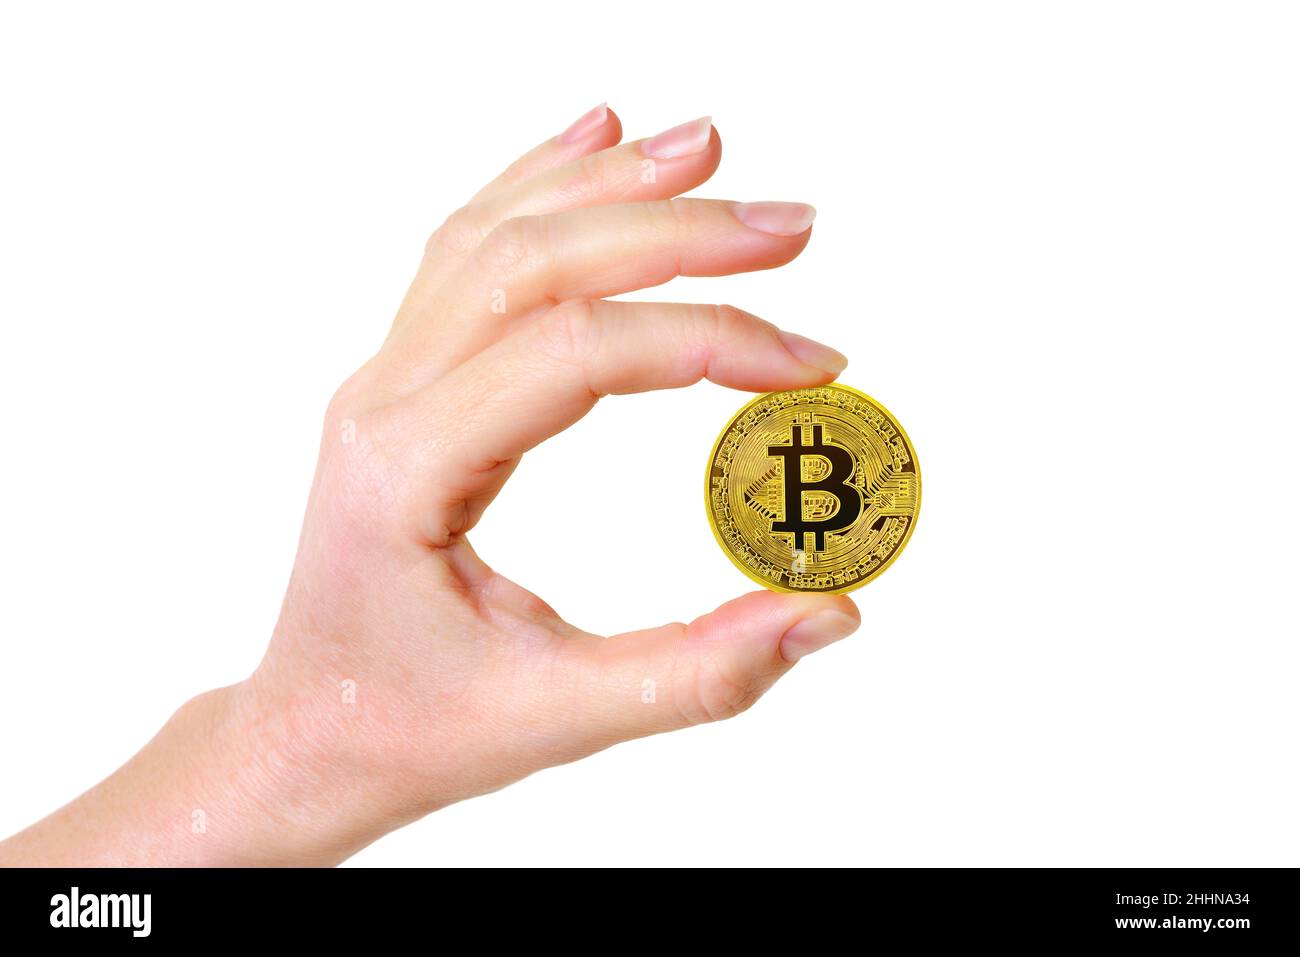 Bitcoin Cryptocurrency Coin Held Between a Womans Fingers Stock Photo